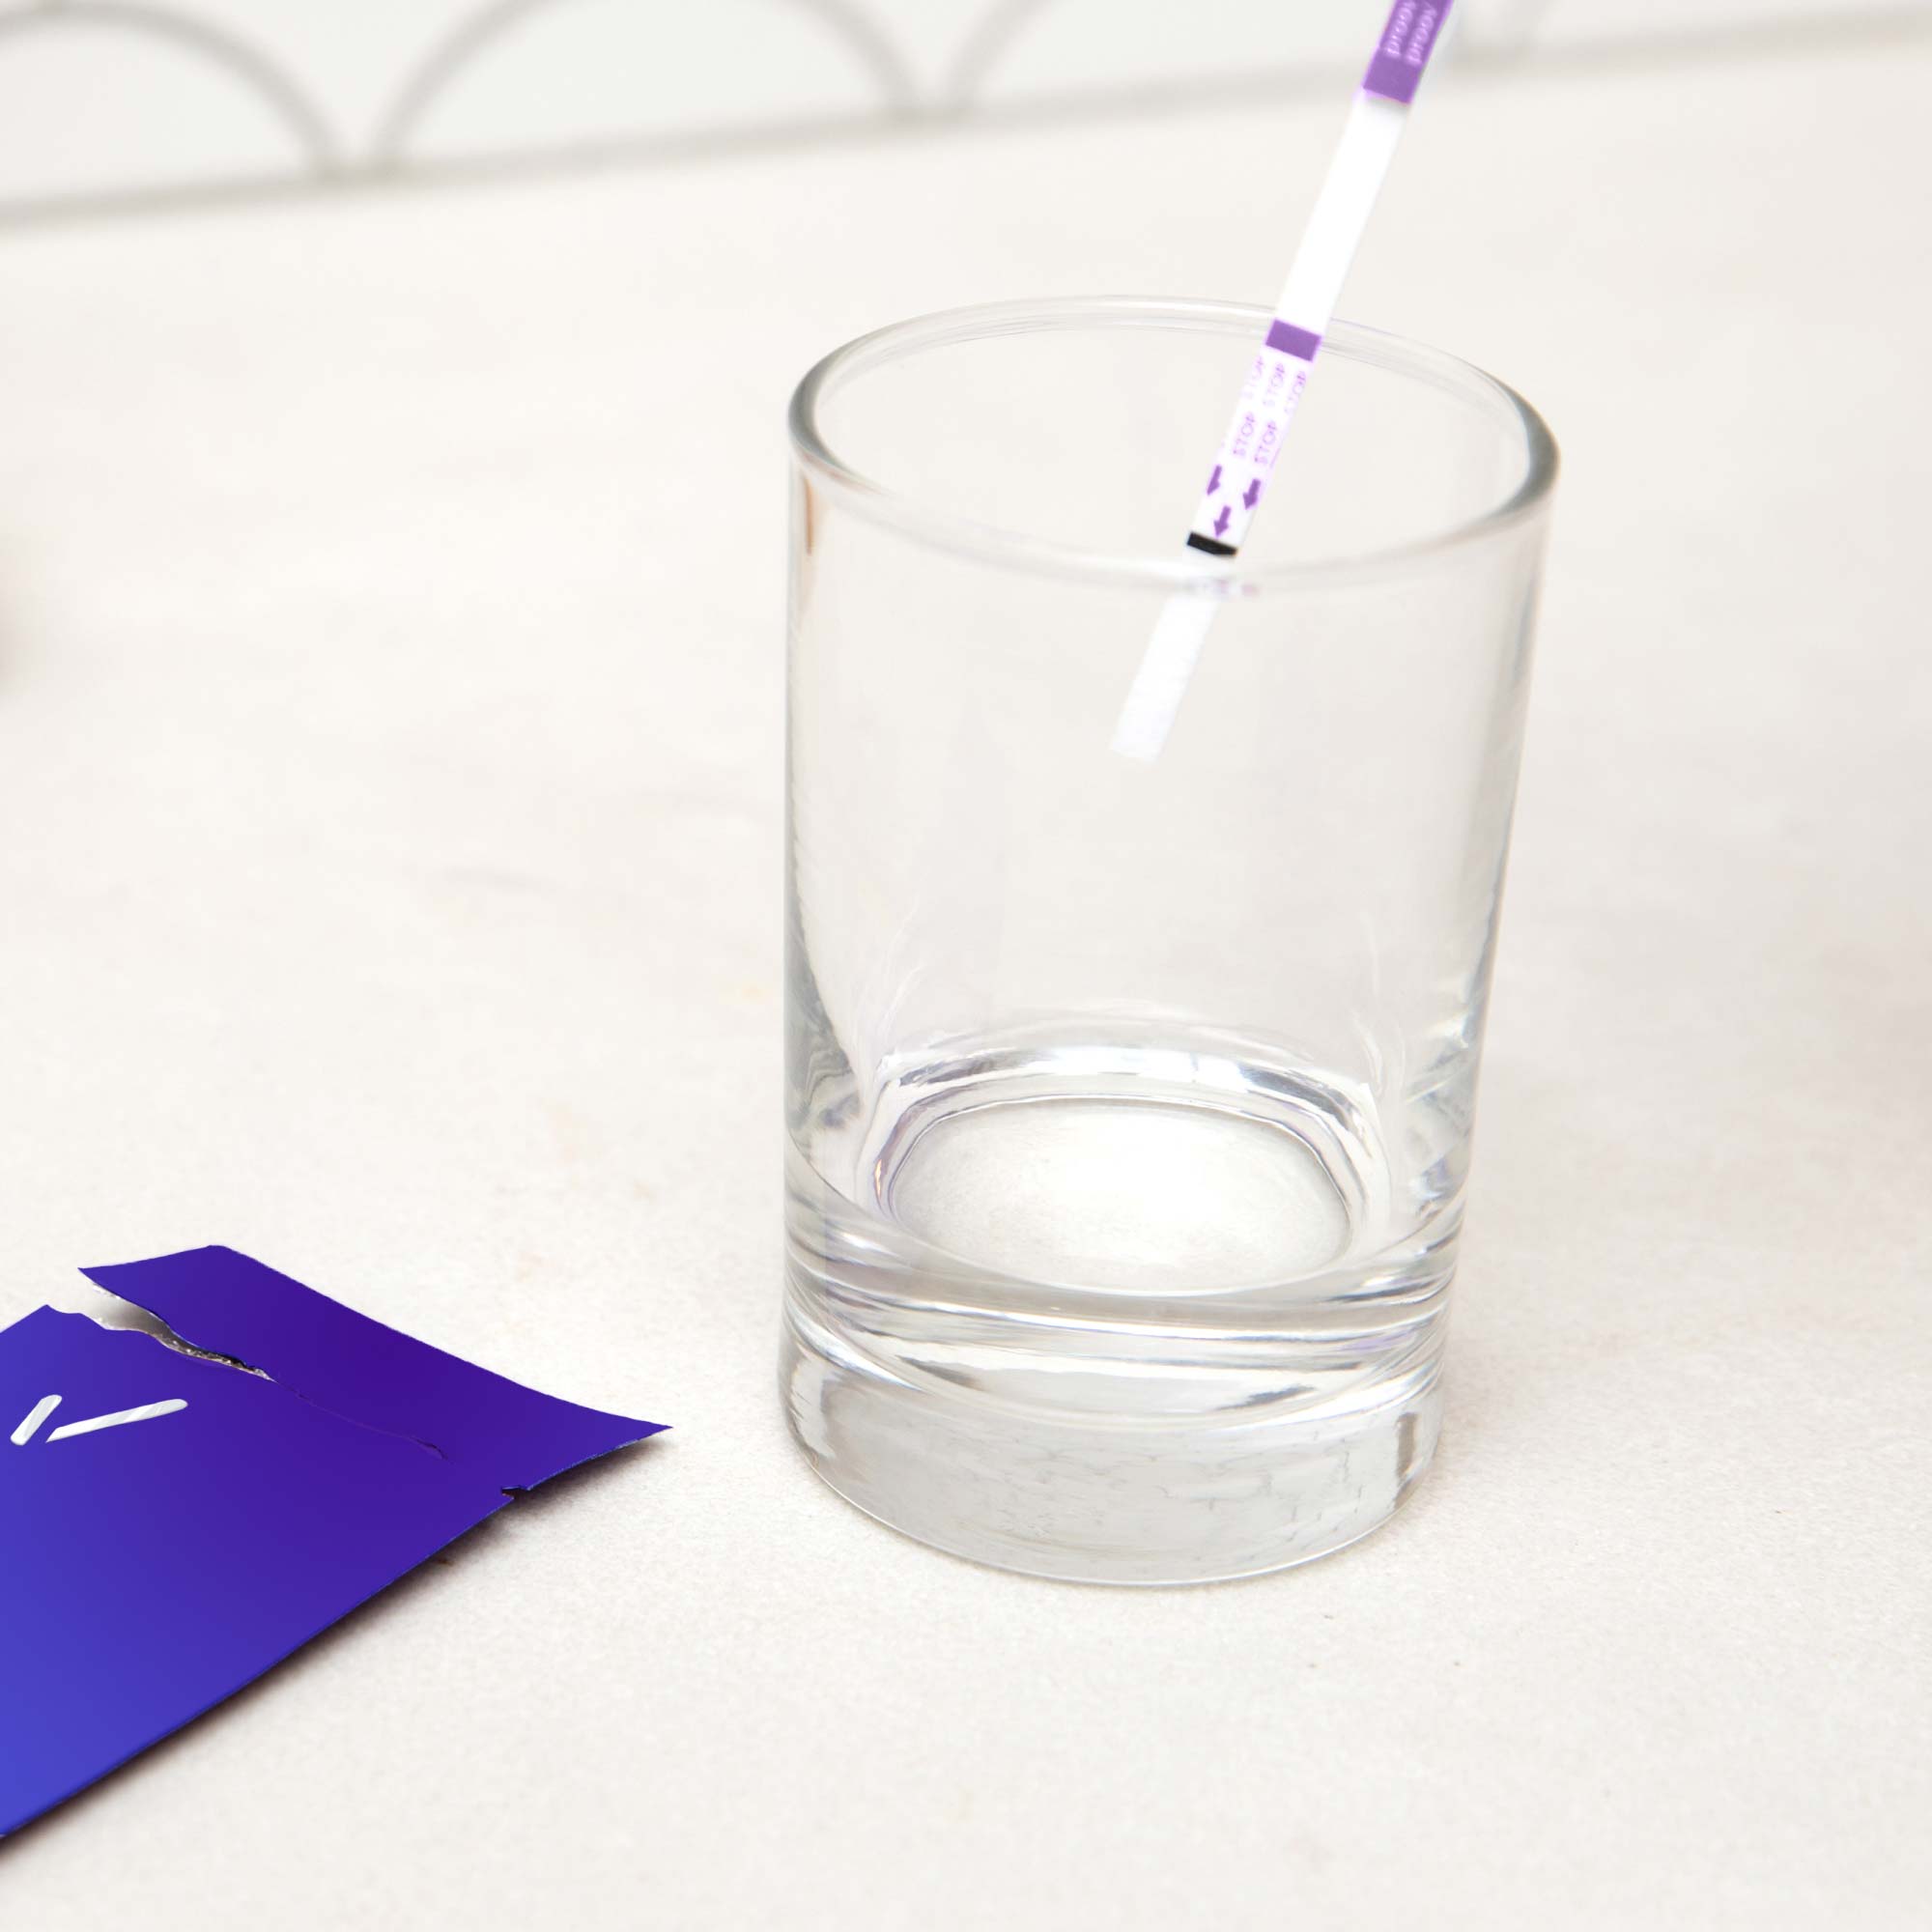 A test strip in a glass on a countertop with an opened Proov packet